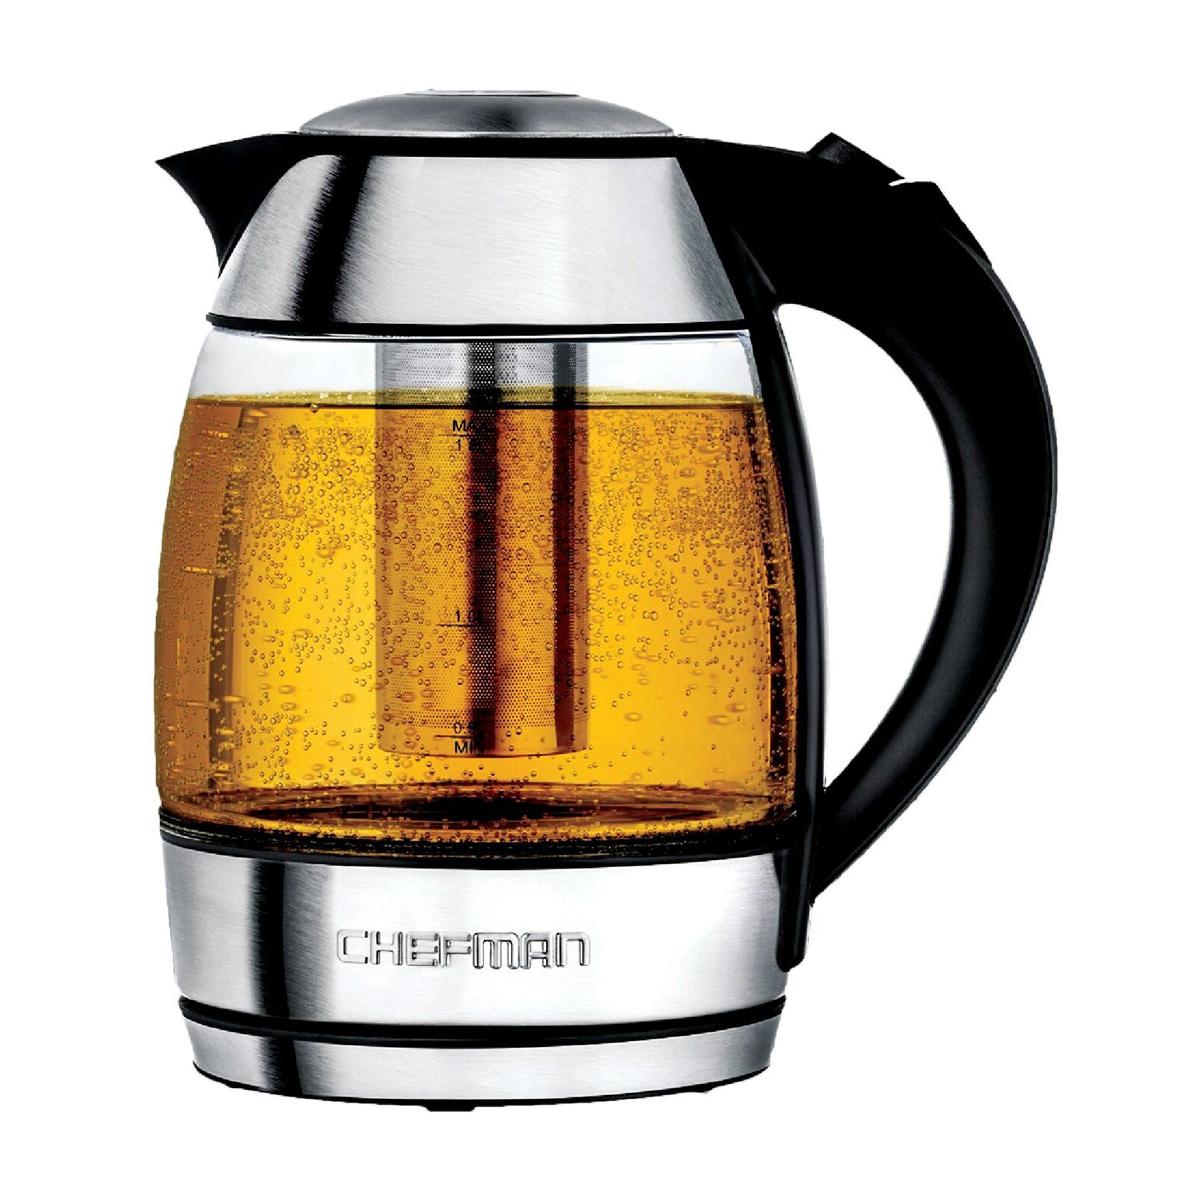 Chefman 1.8L Electric Glass Kettle with Tea Infuser for $14.53 Shipped